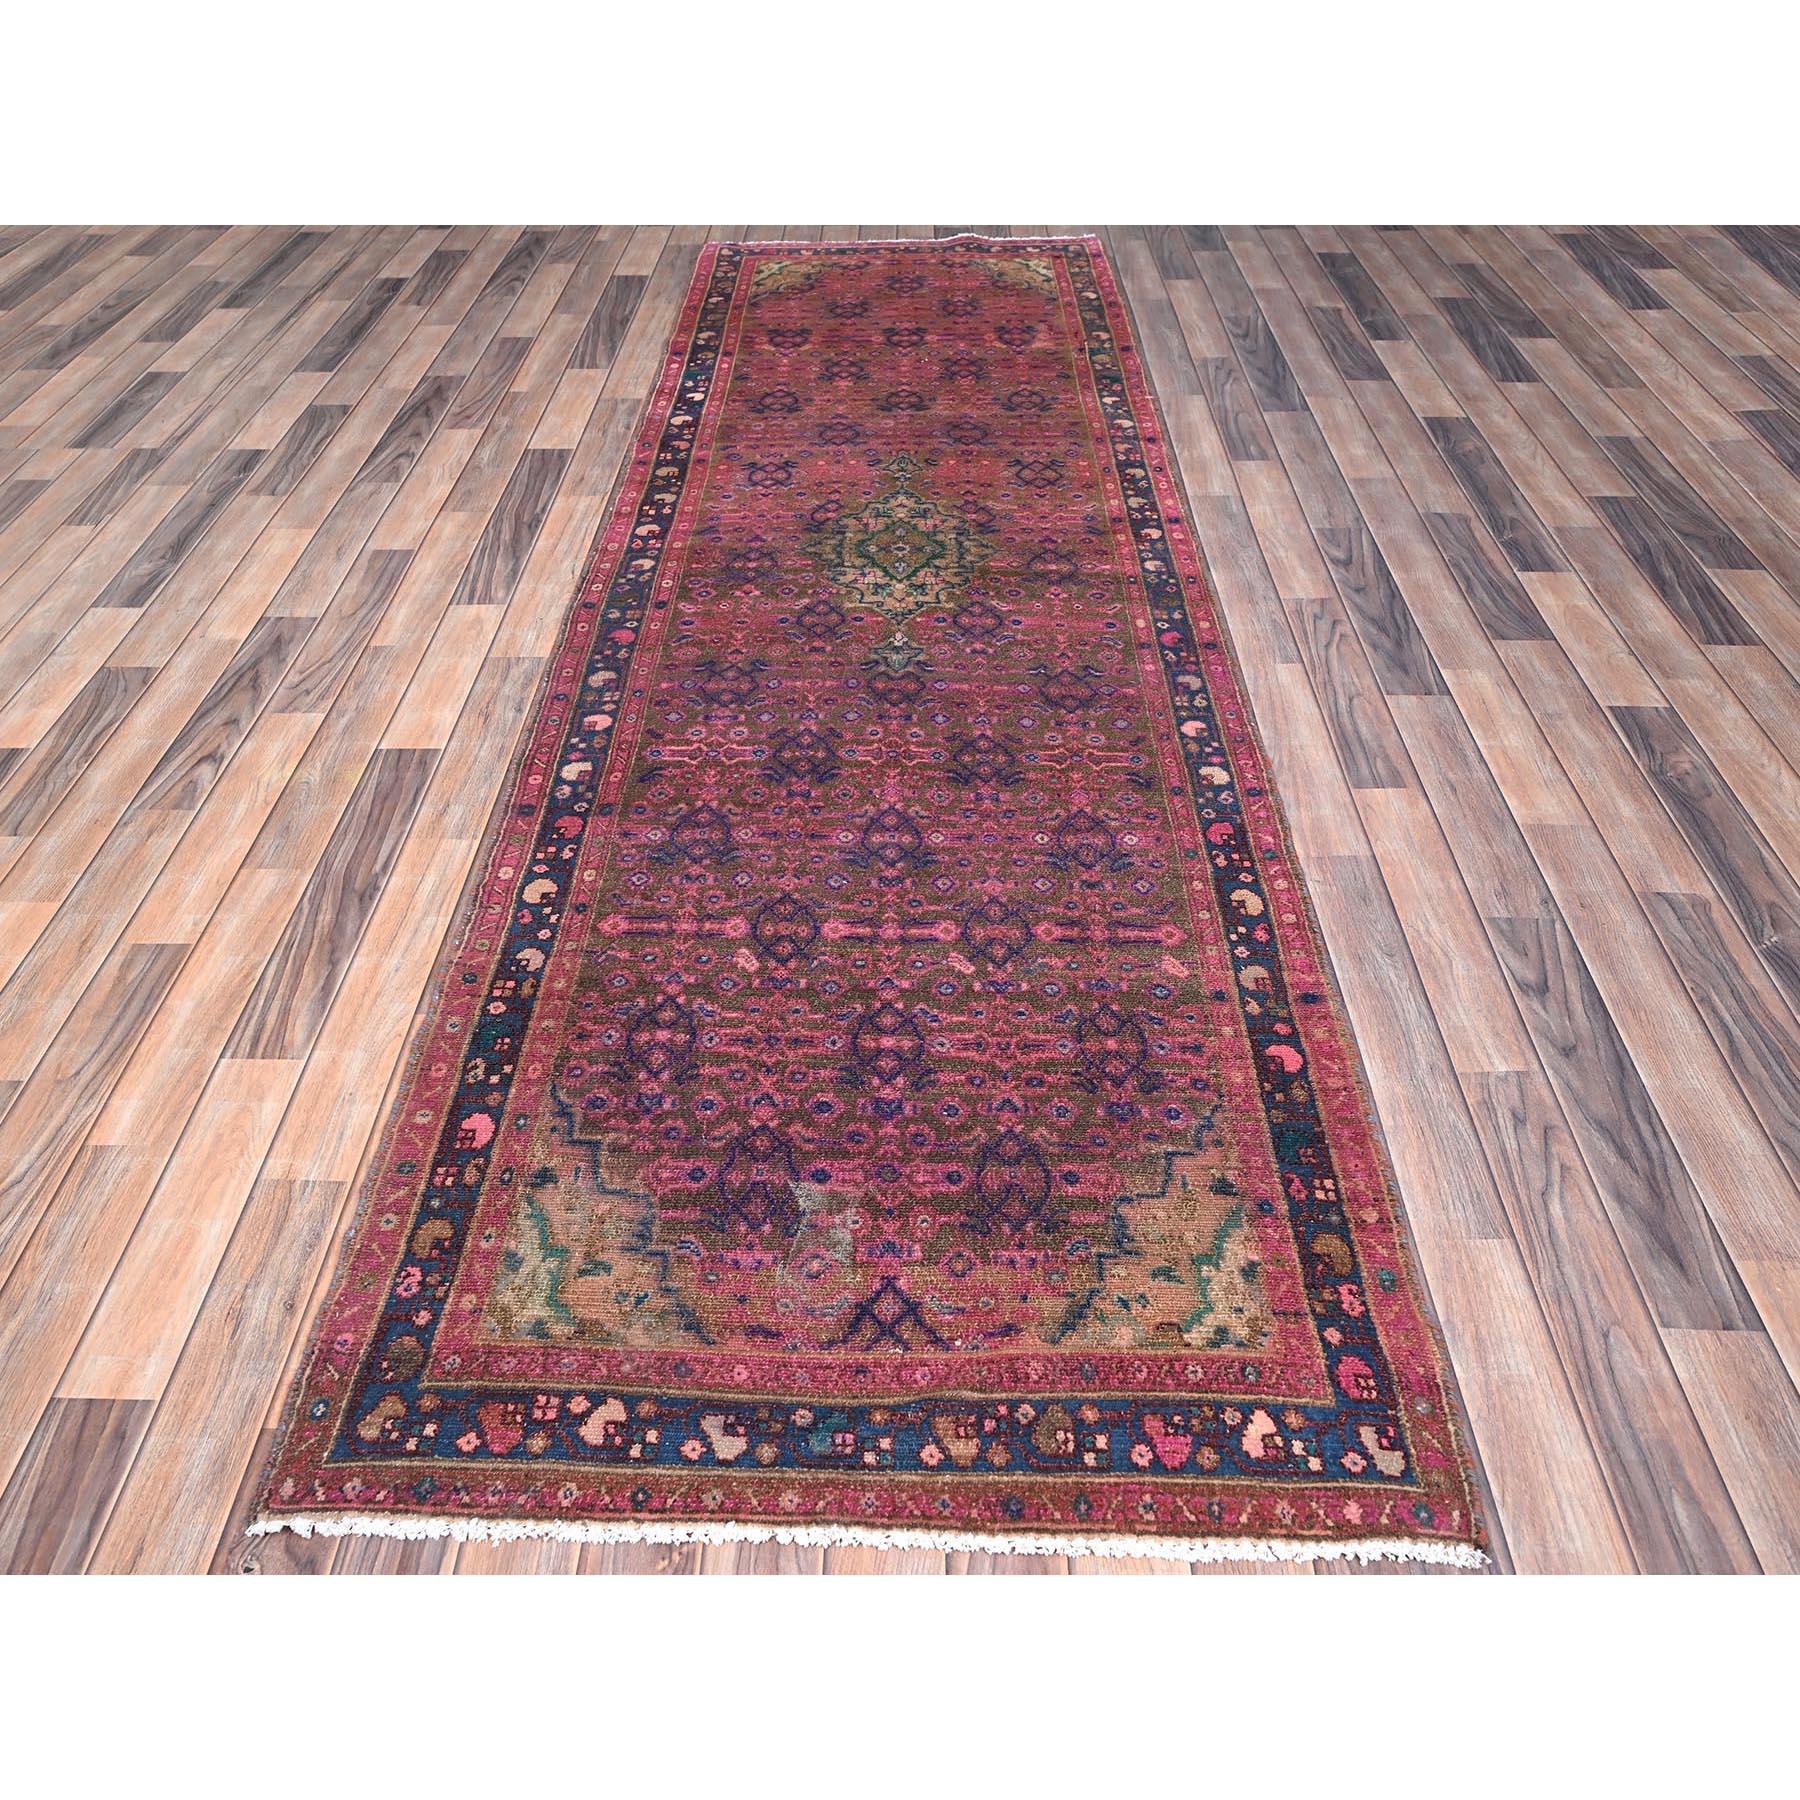 Medieval Purple Overdyed Hand Knotted Old Persian Hamadan Wool Clean Rustic Runner Rug For Sale